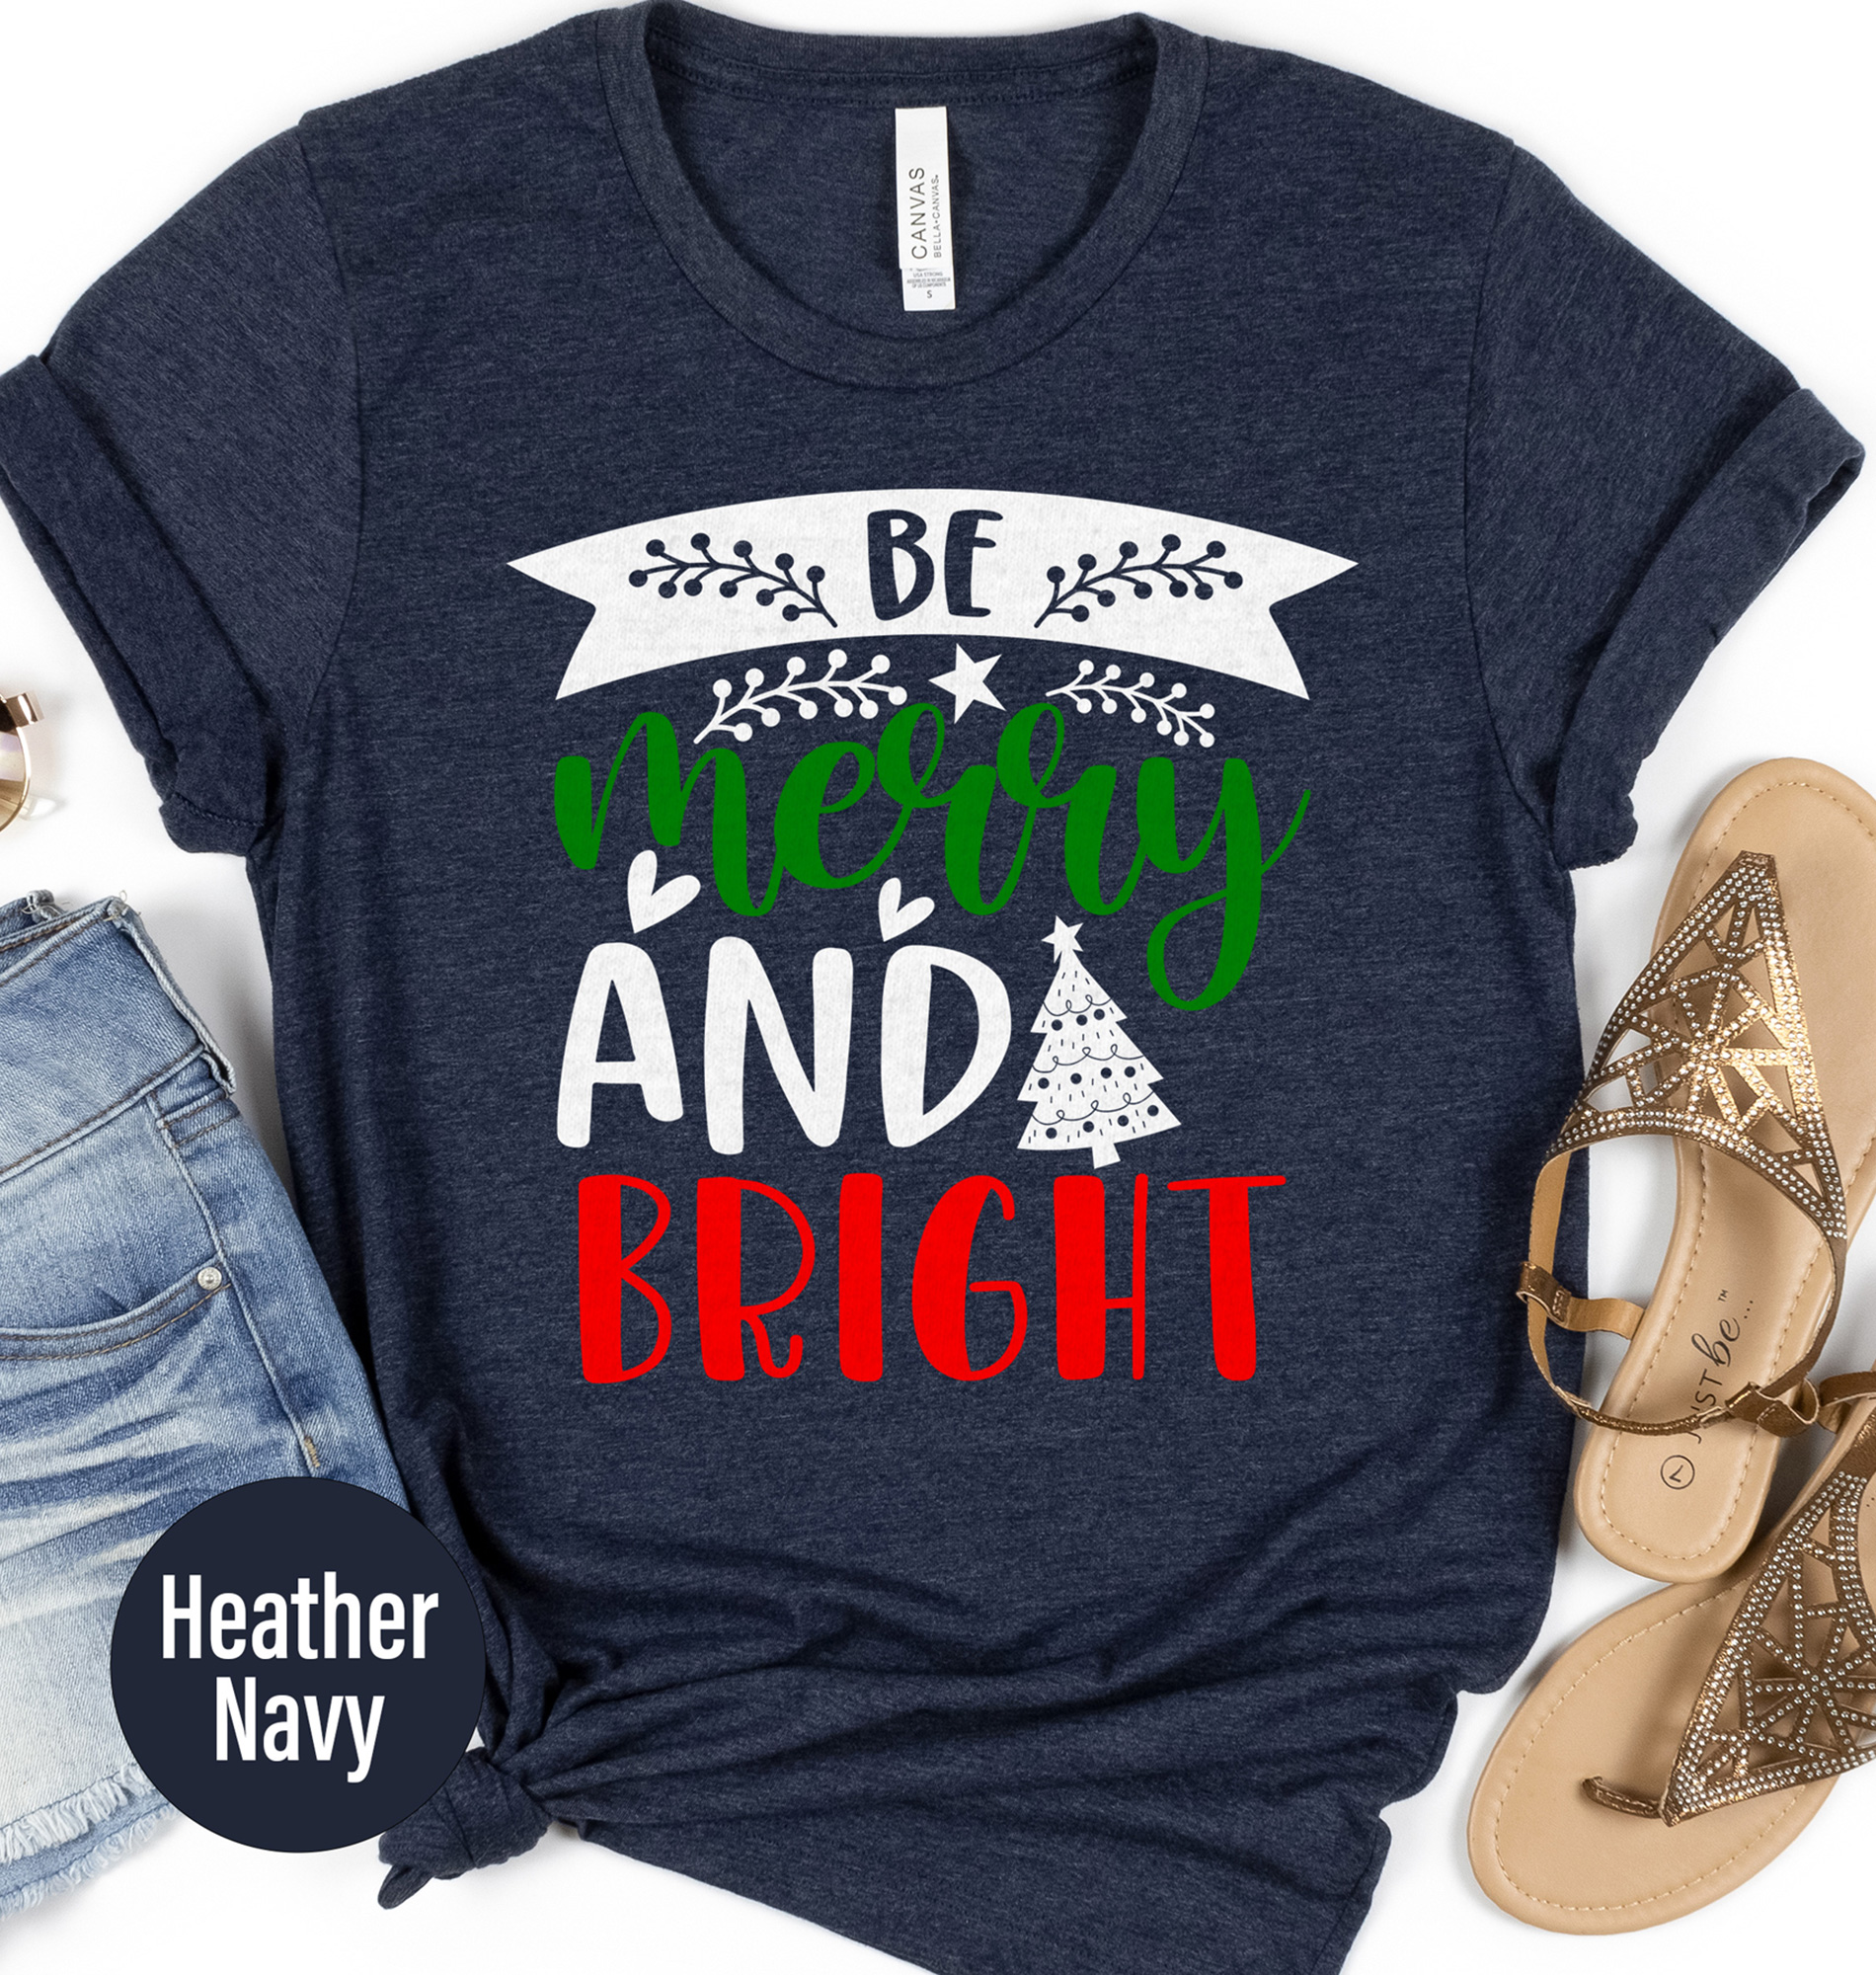 Be Merry Bright Christmas Tee - Festive Holiday Wear